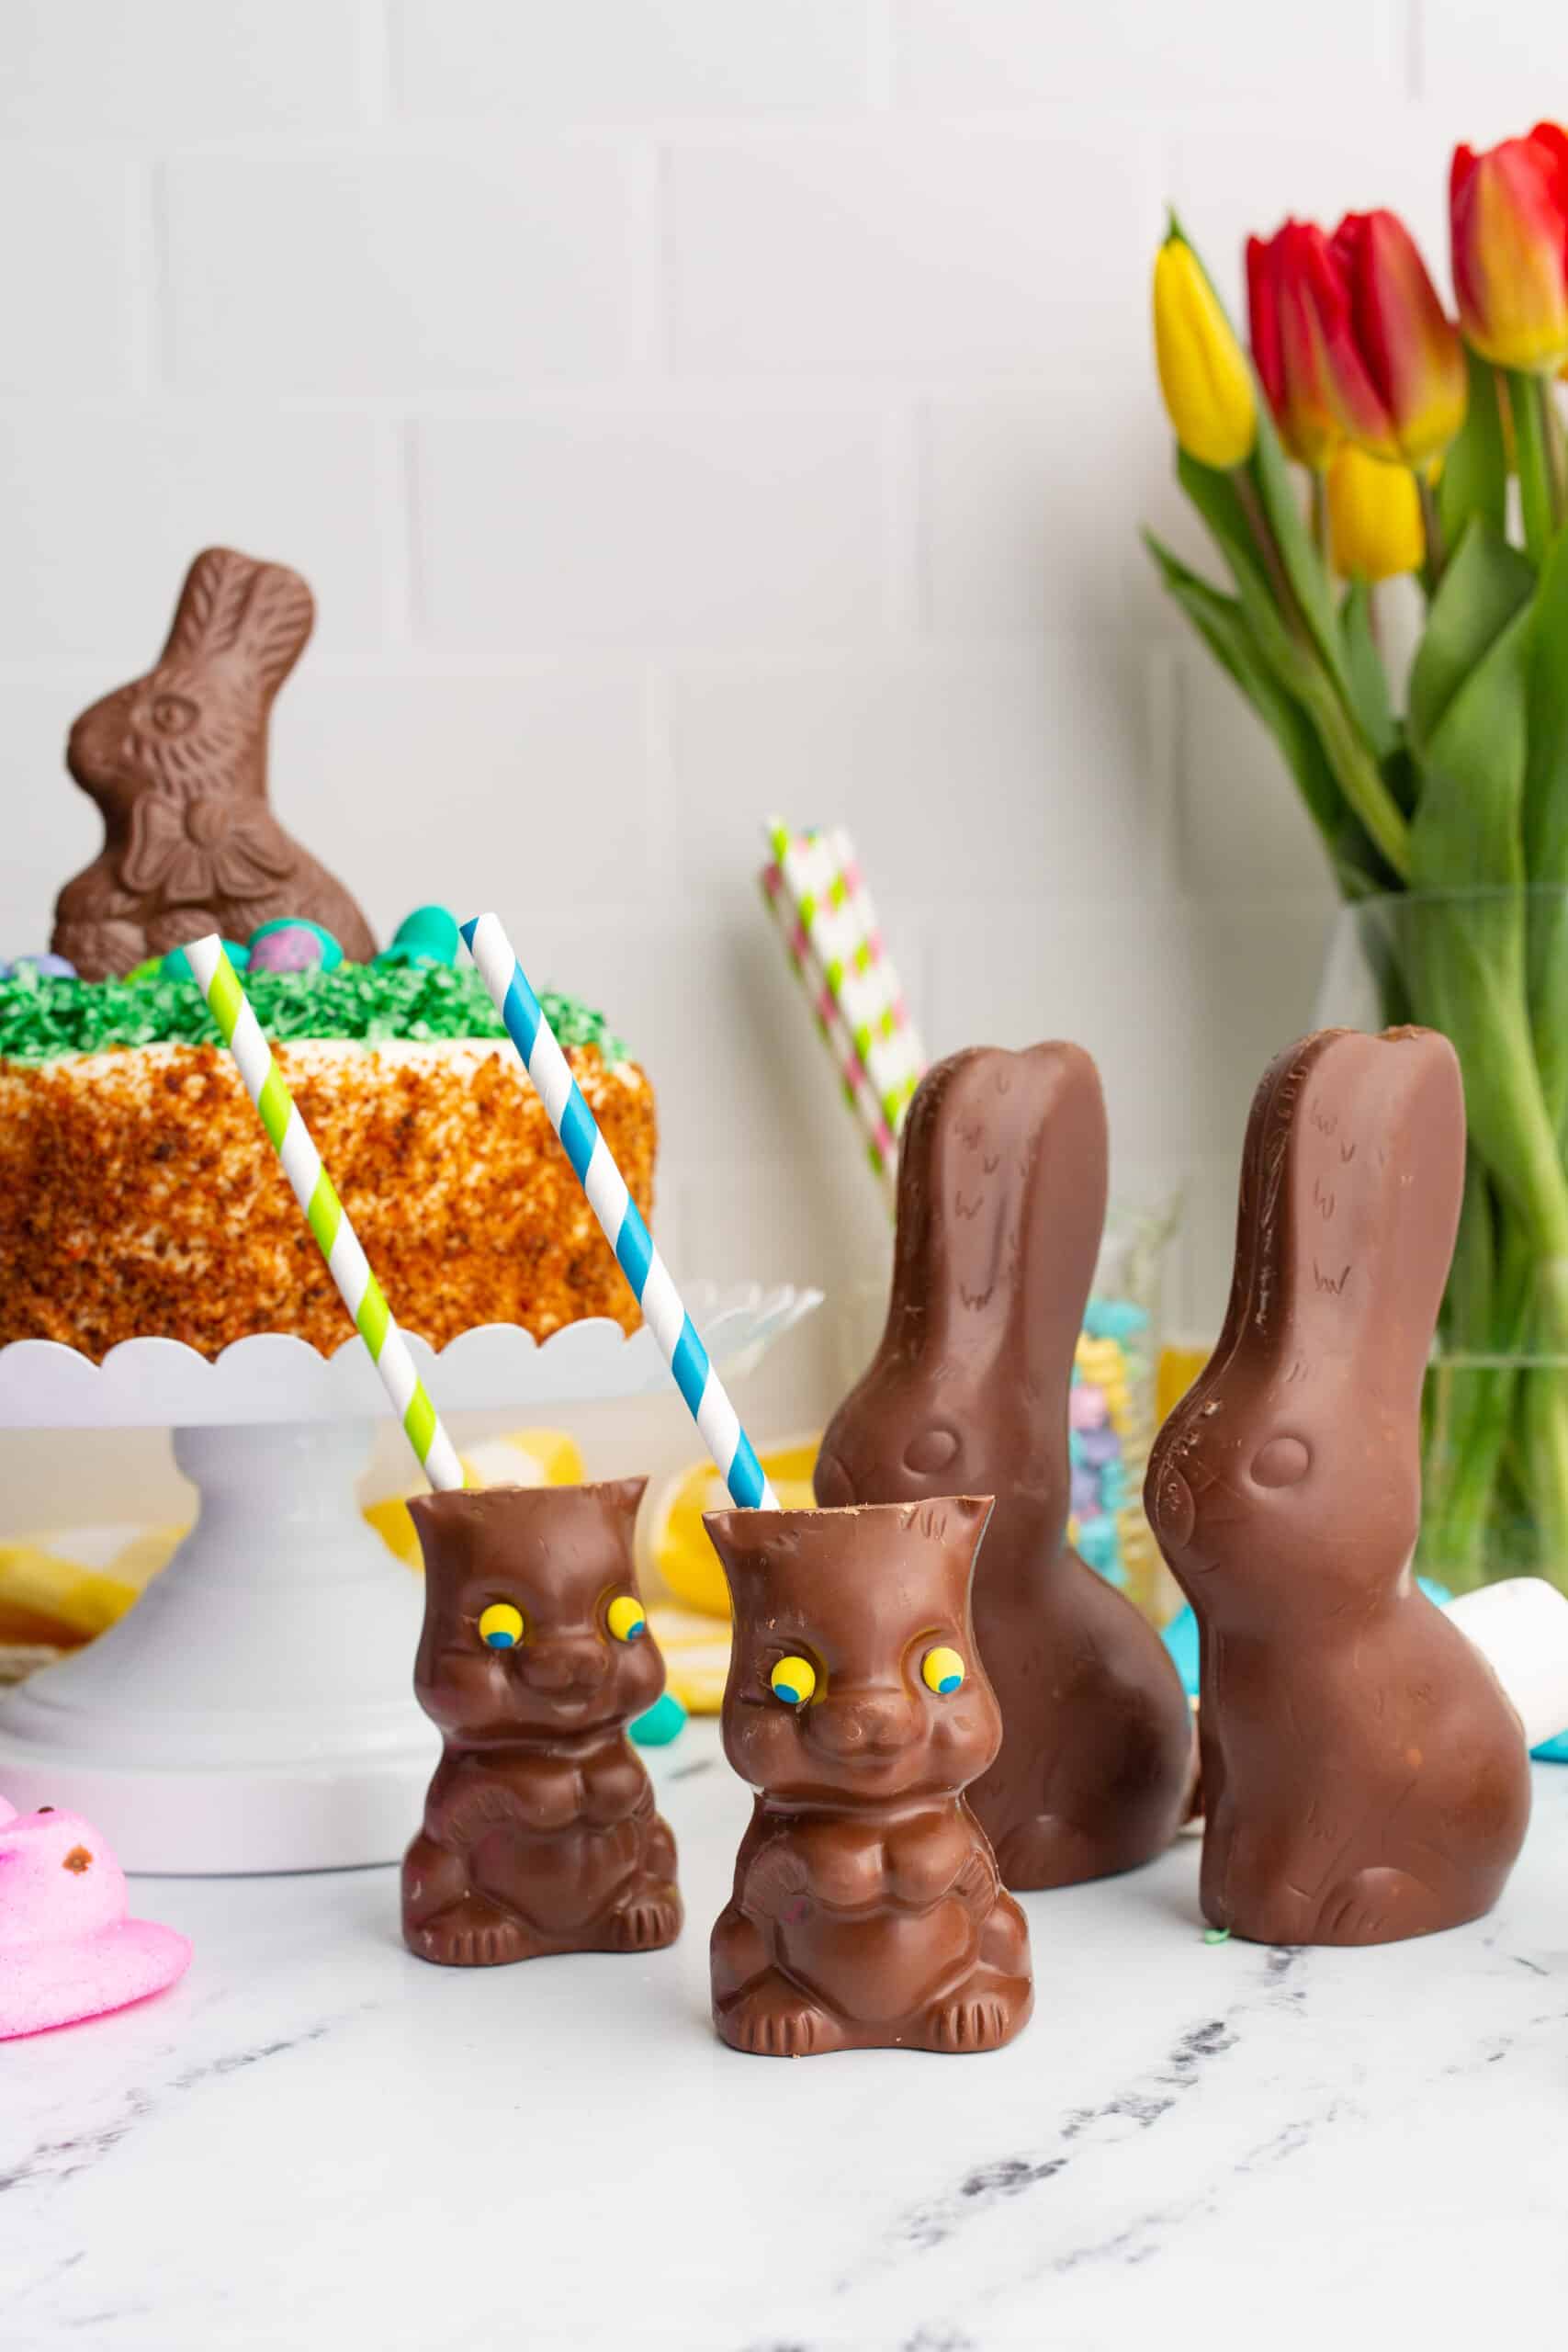 What To Do with Chocolate Bunnies: 3 Ways to Use Chocolate Easter Bunnies